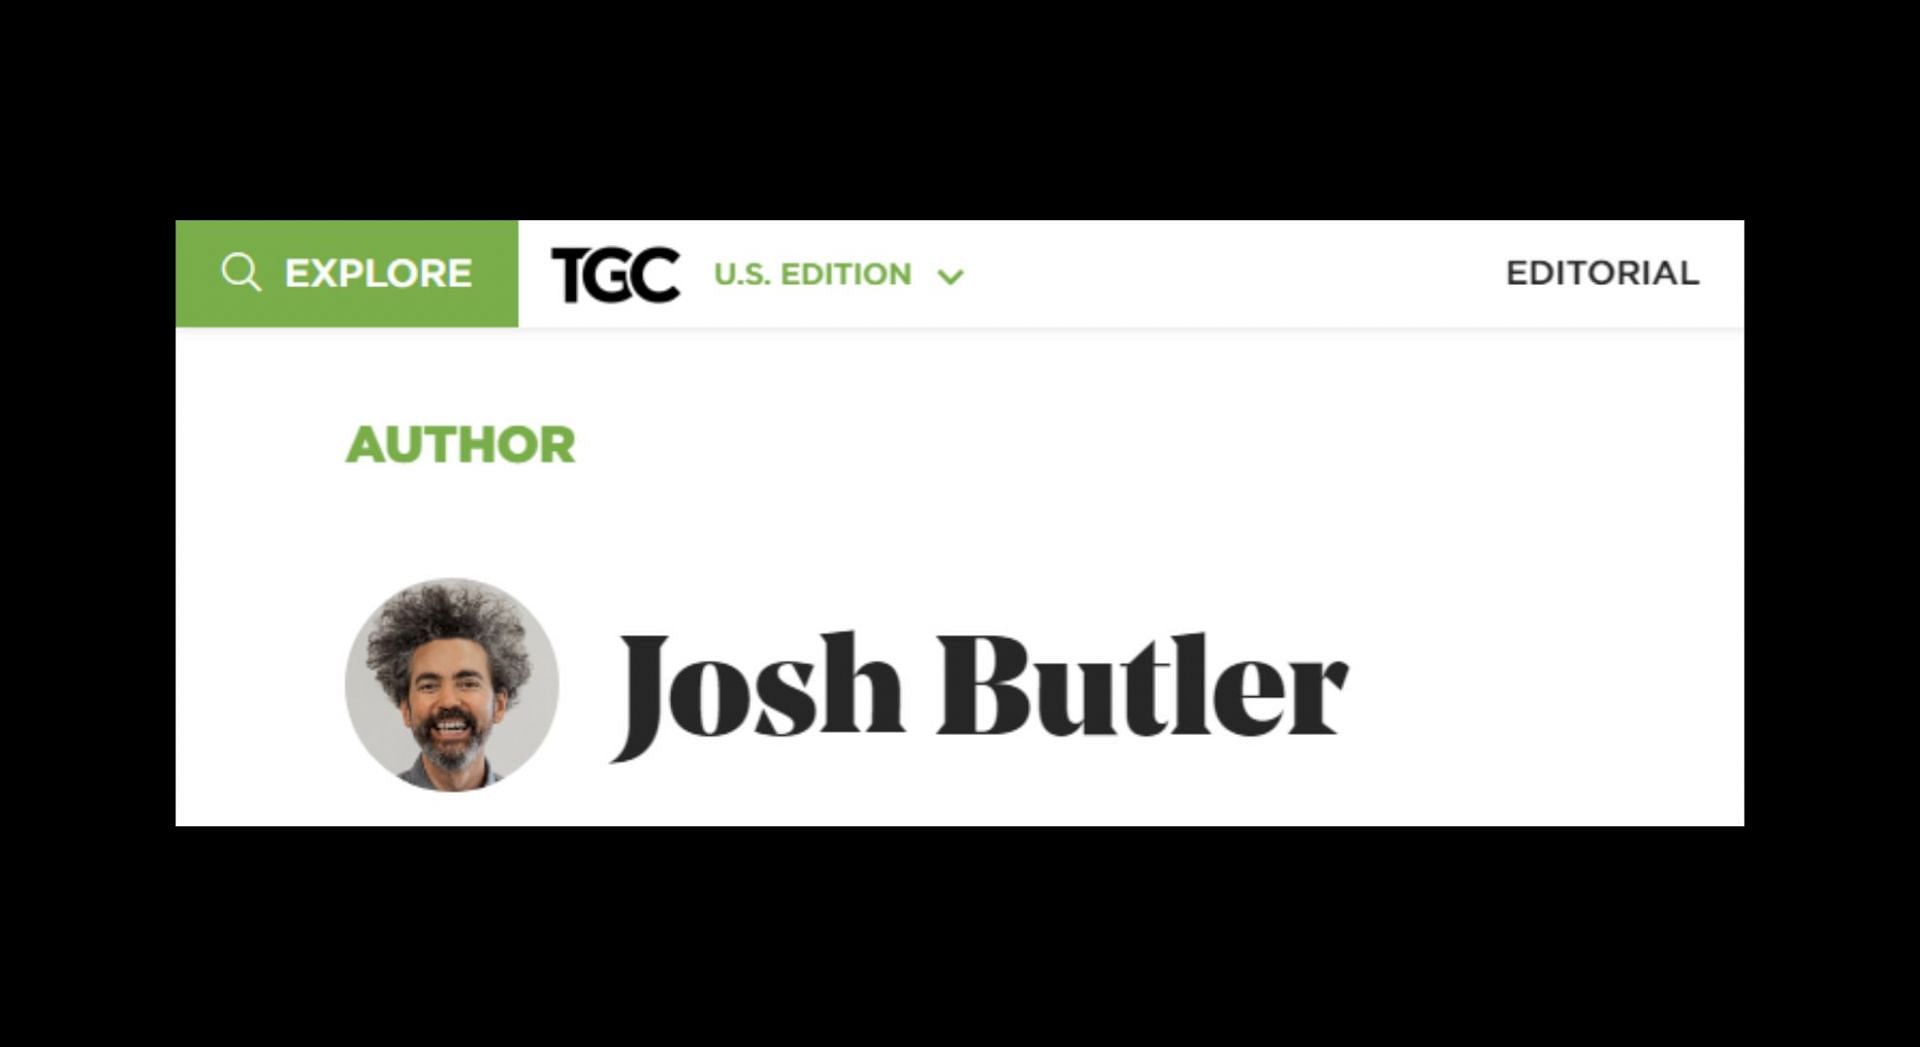 Social media users called out Josh Butler over controversial TGC article and book excerpt (Image via @/DontDoHumanism/Twitter)